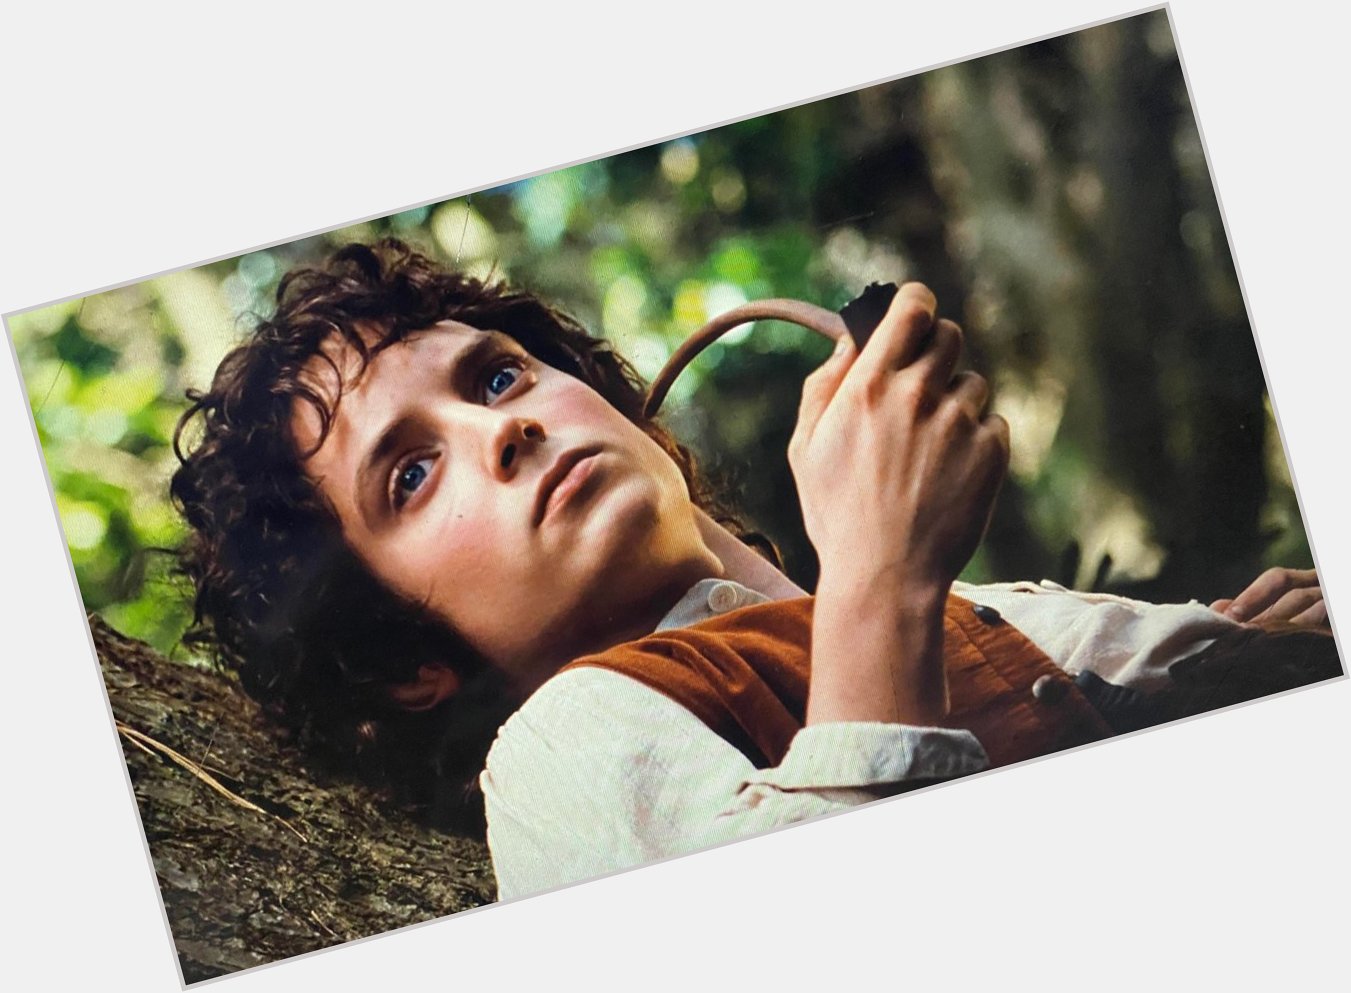 Happy birthday Elijah Wood. Is pipe weed legal in the Shire yet?    